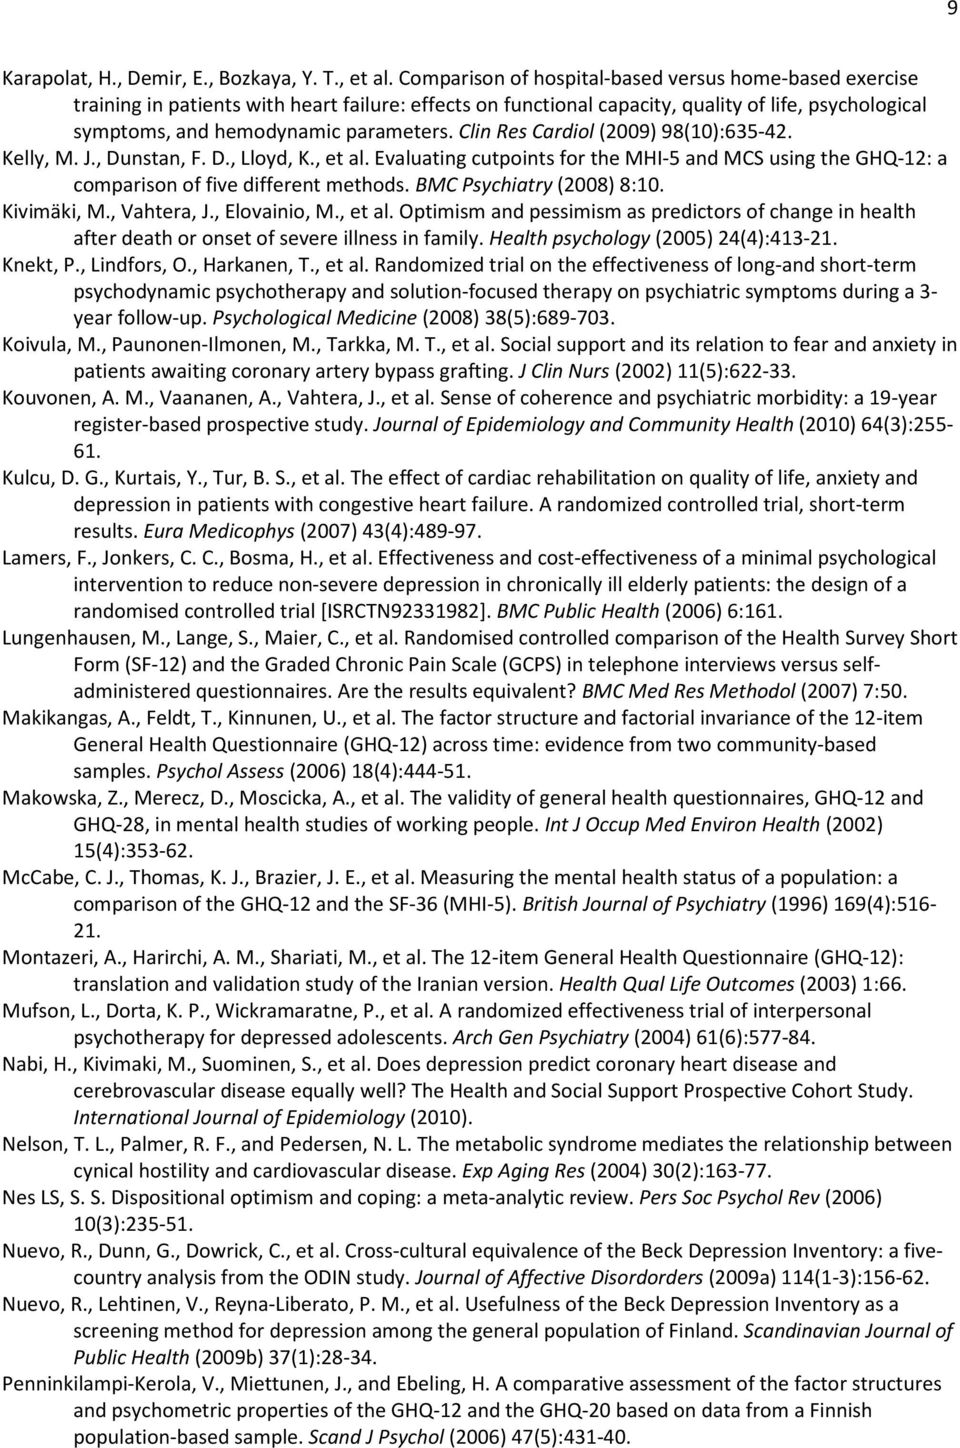 Clin Res Cardiol (2009) 98(10):635-42. Kelly, M. J., Dunstan, F. D., Lloyd, K., et al. Evaluating cutpoints for the MHI-5 and MCS using the GHQ-12: a comparison of five different methods.